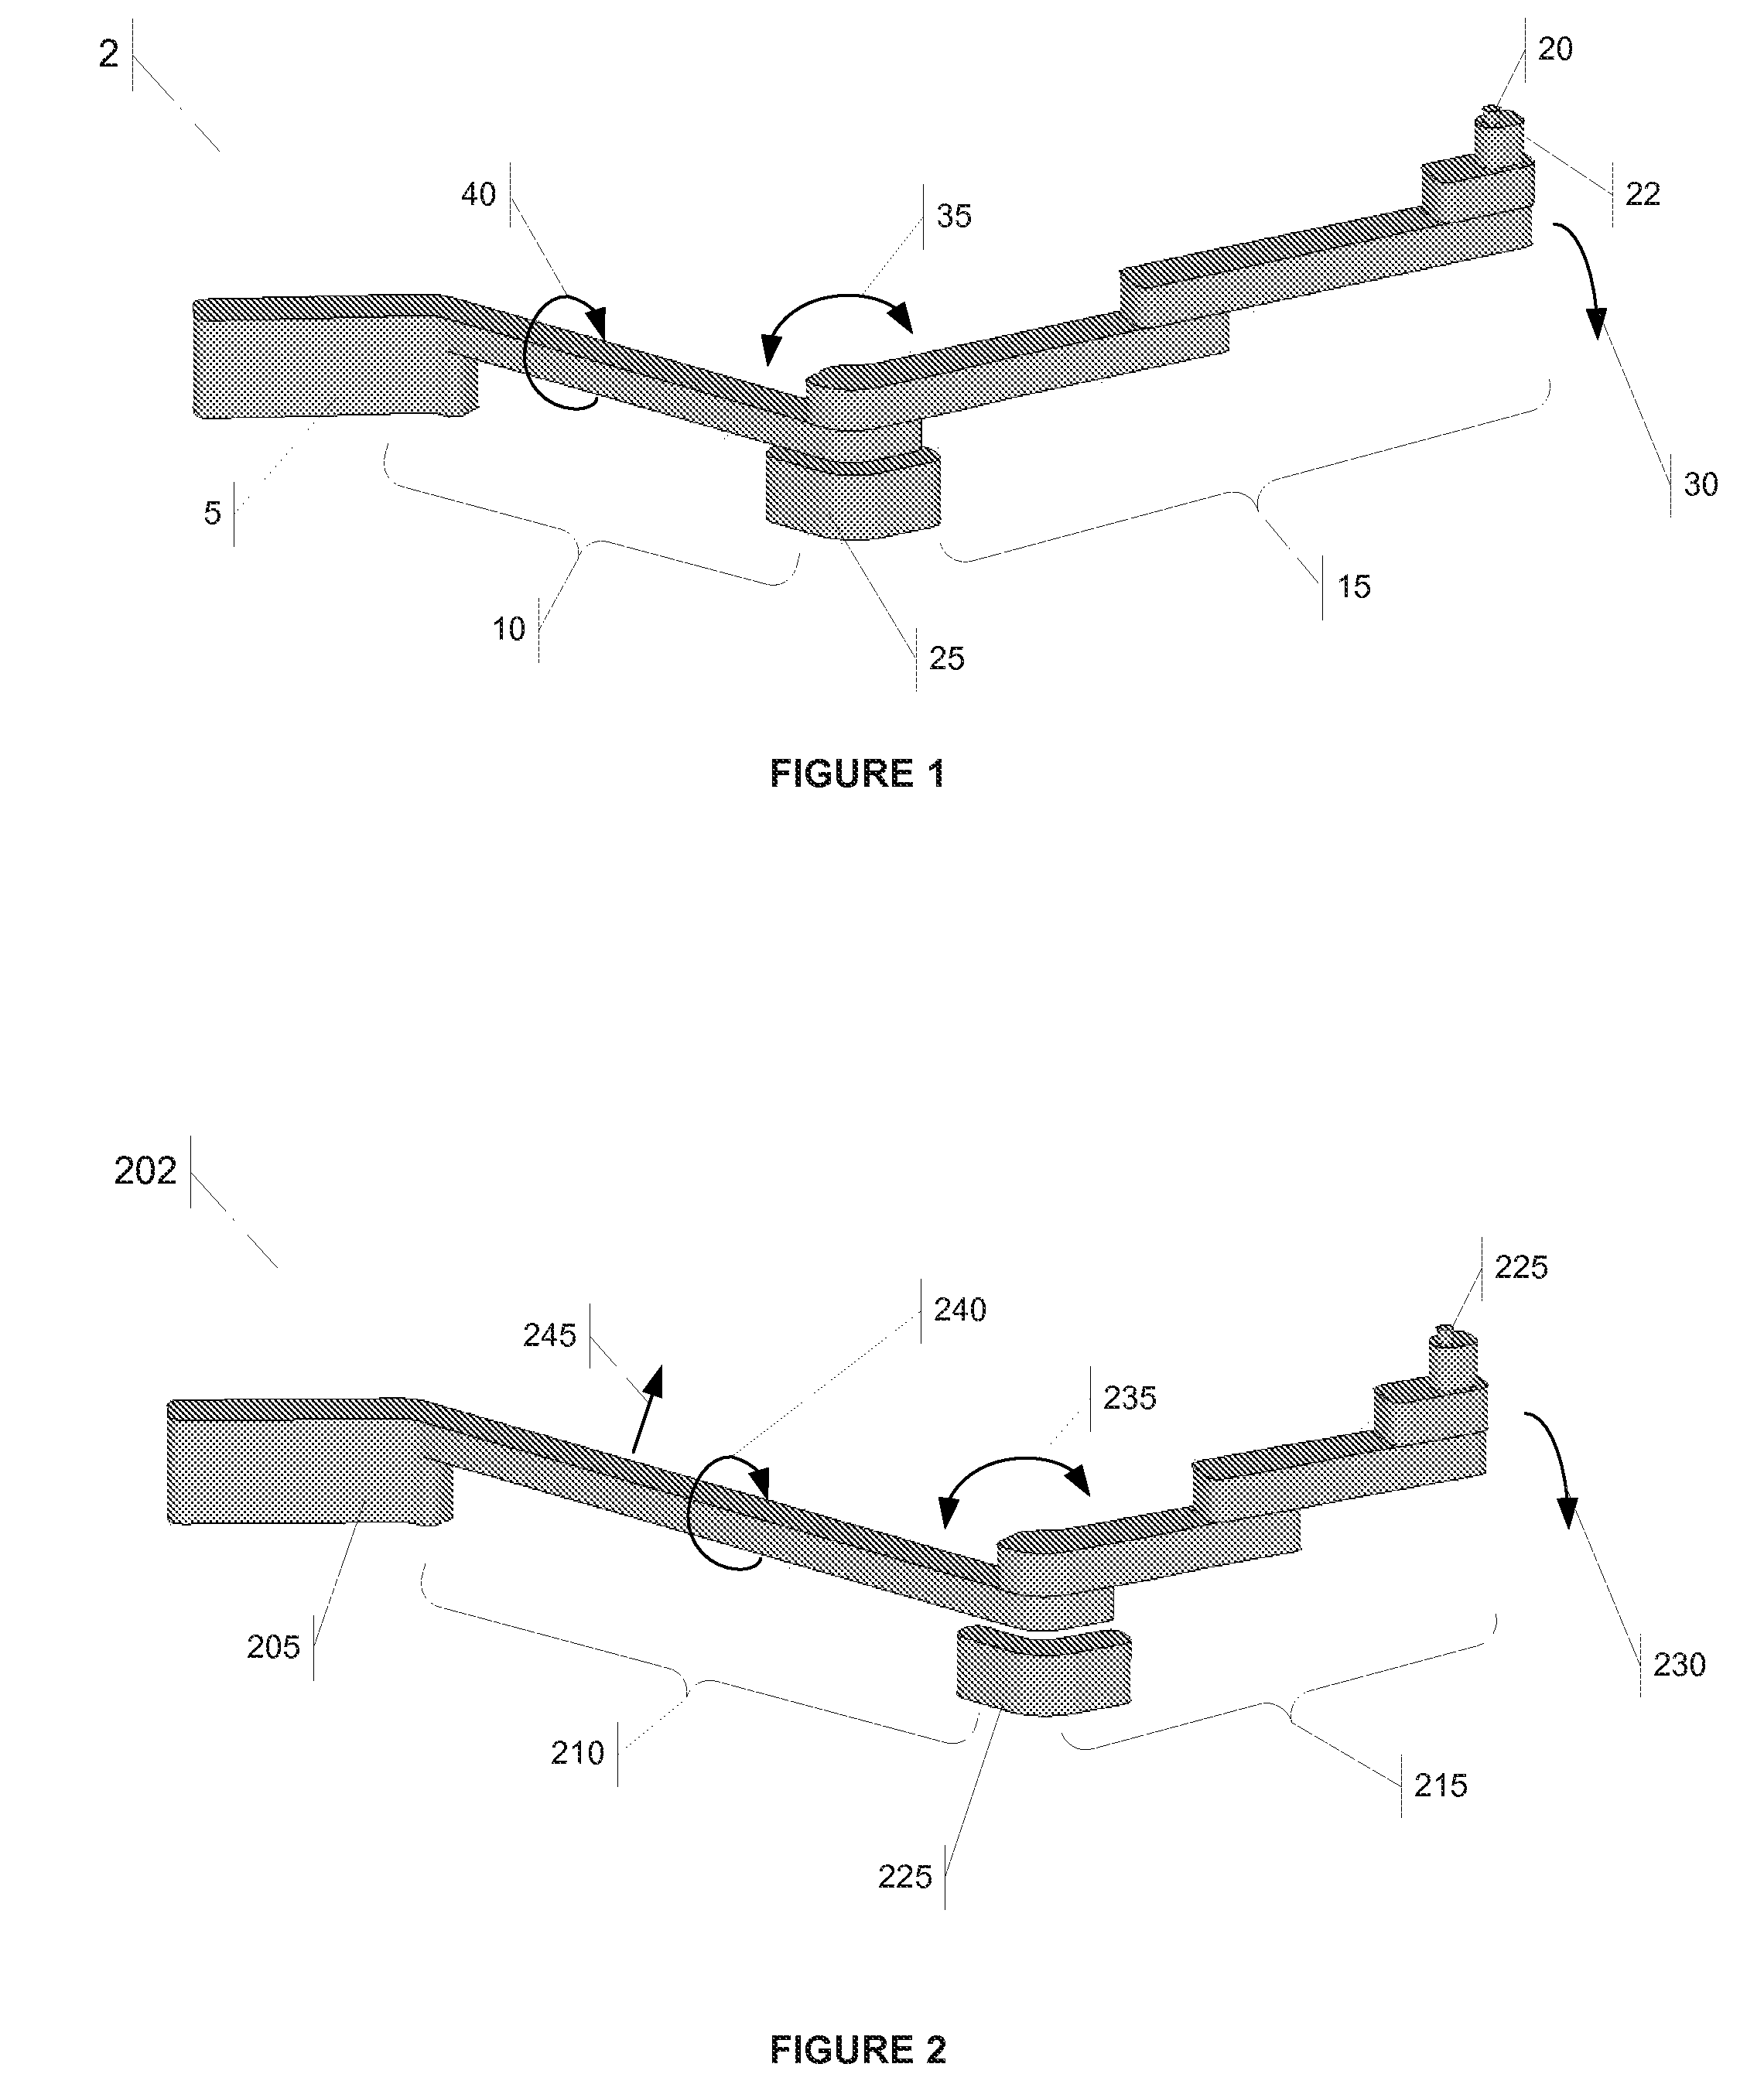 Hybrid probe for testing semiconductor devices